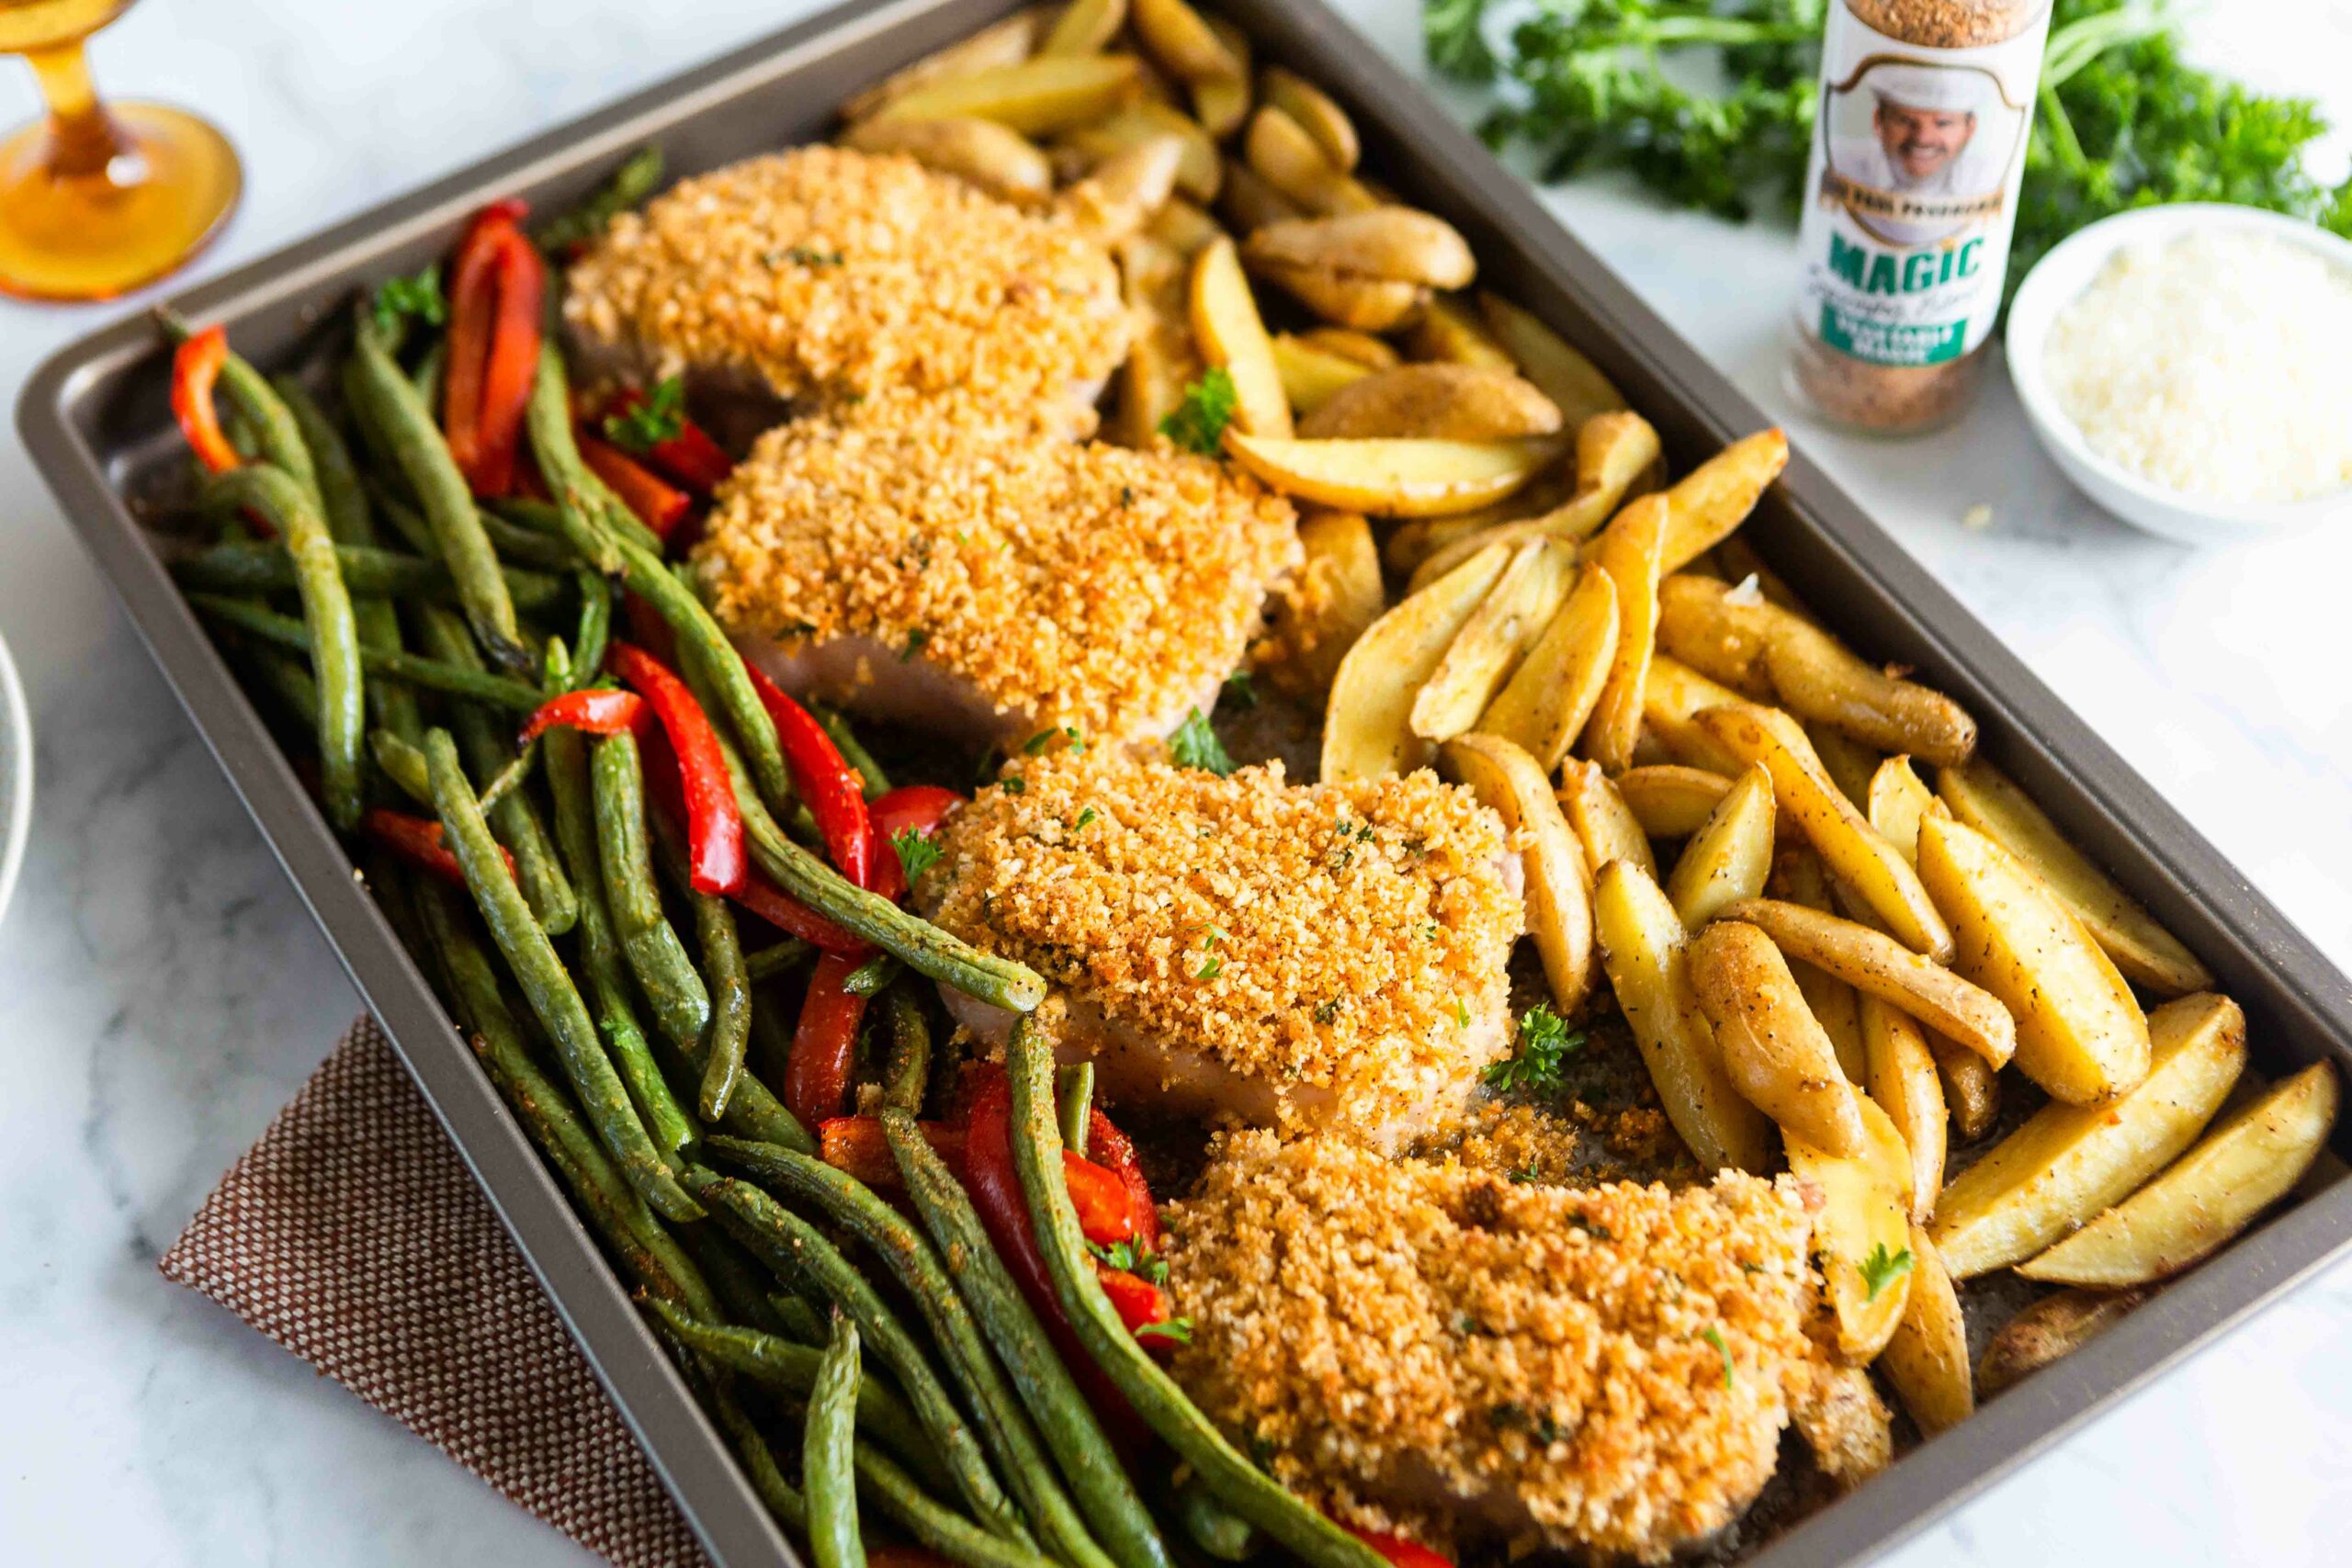 a shet pan of sheet pan parmesan pork chops including the sides of french fries and green beans and red pepers to be baked